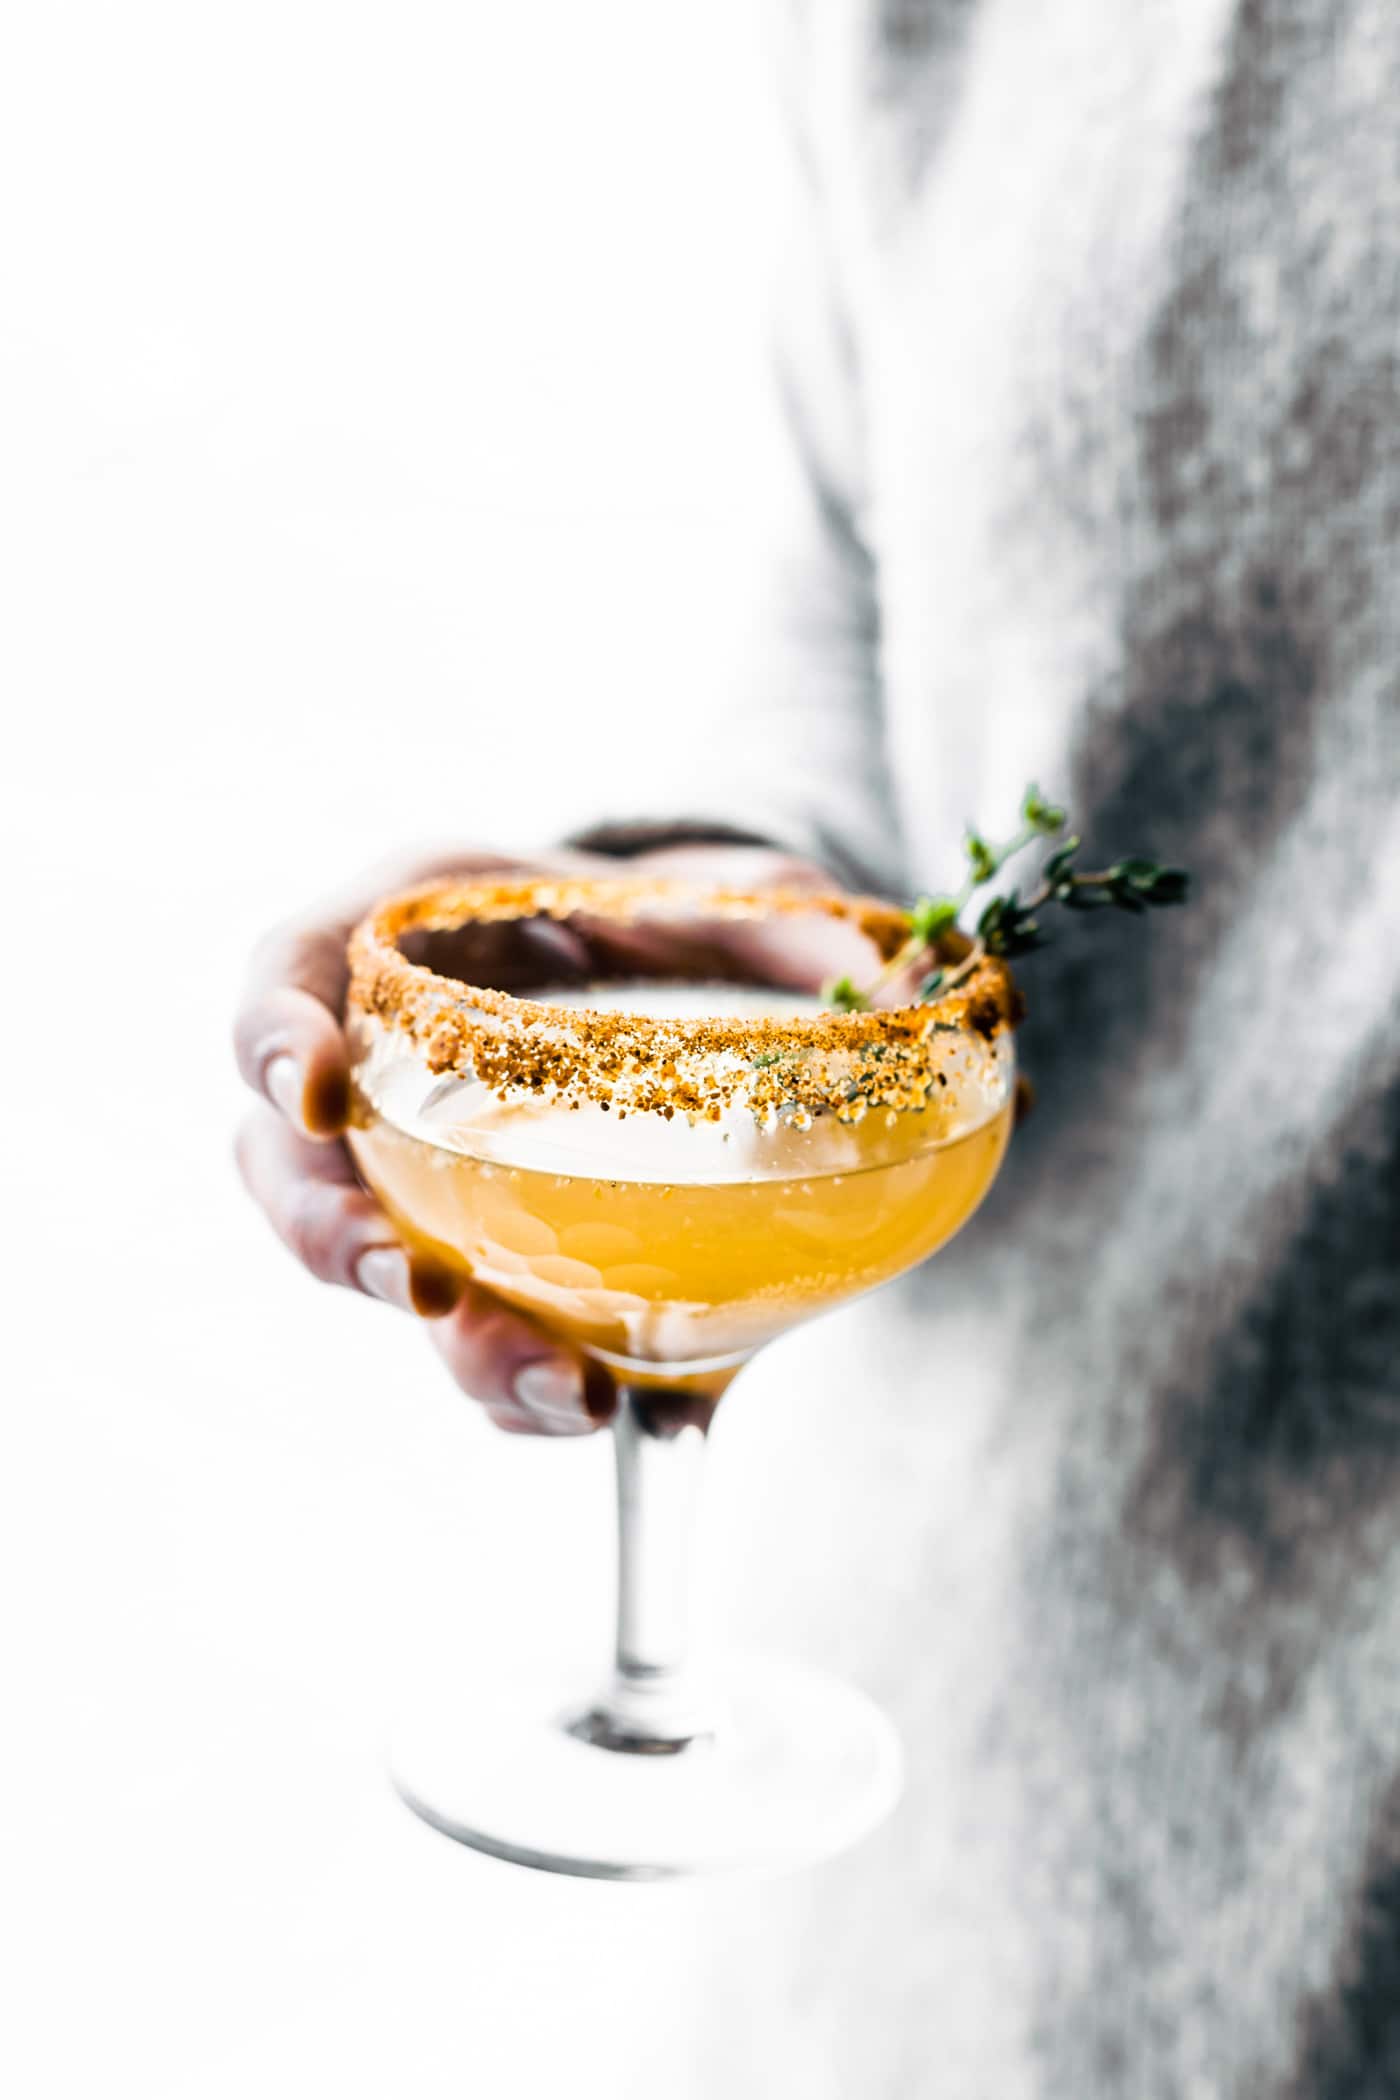 A glass of honey roasted pear cocktail with sugared edge being held by hand.